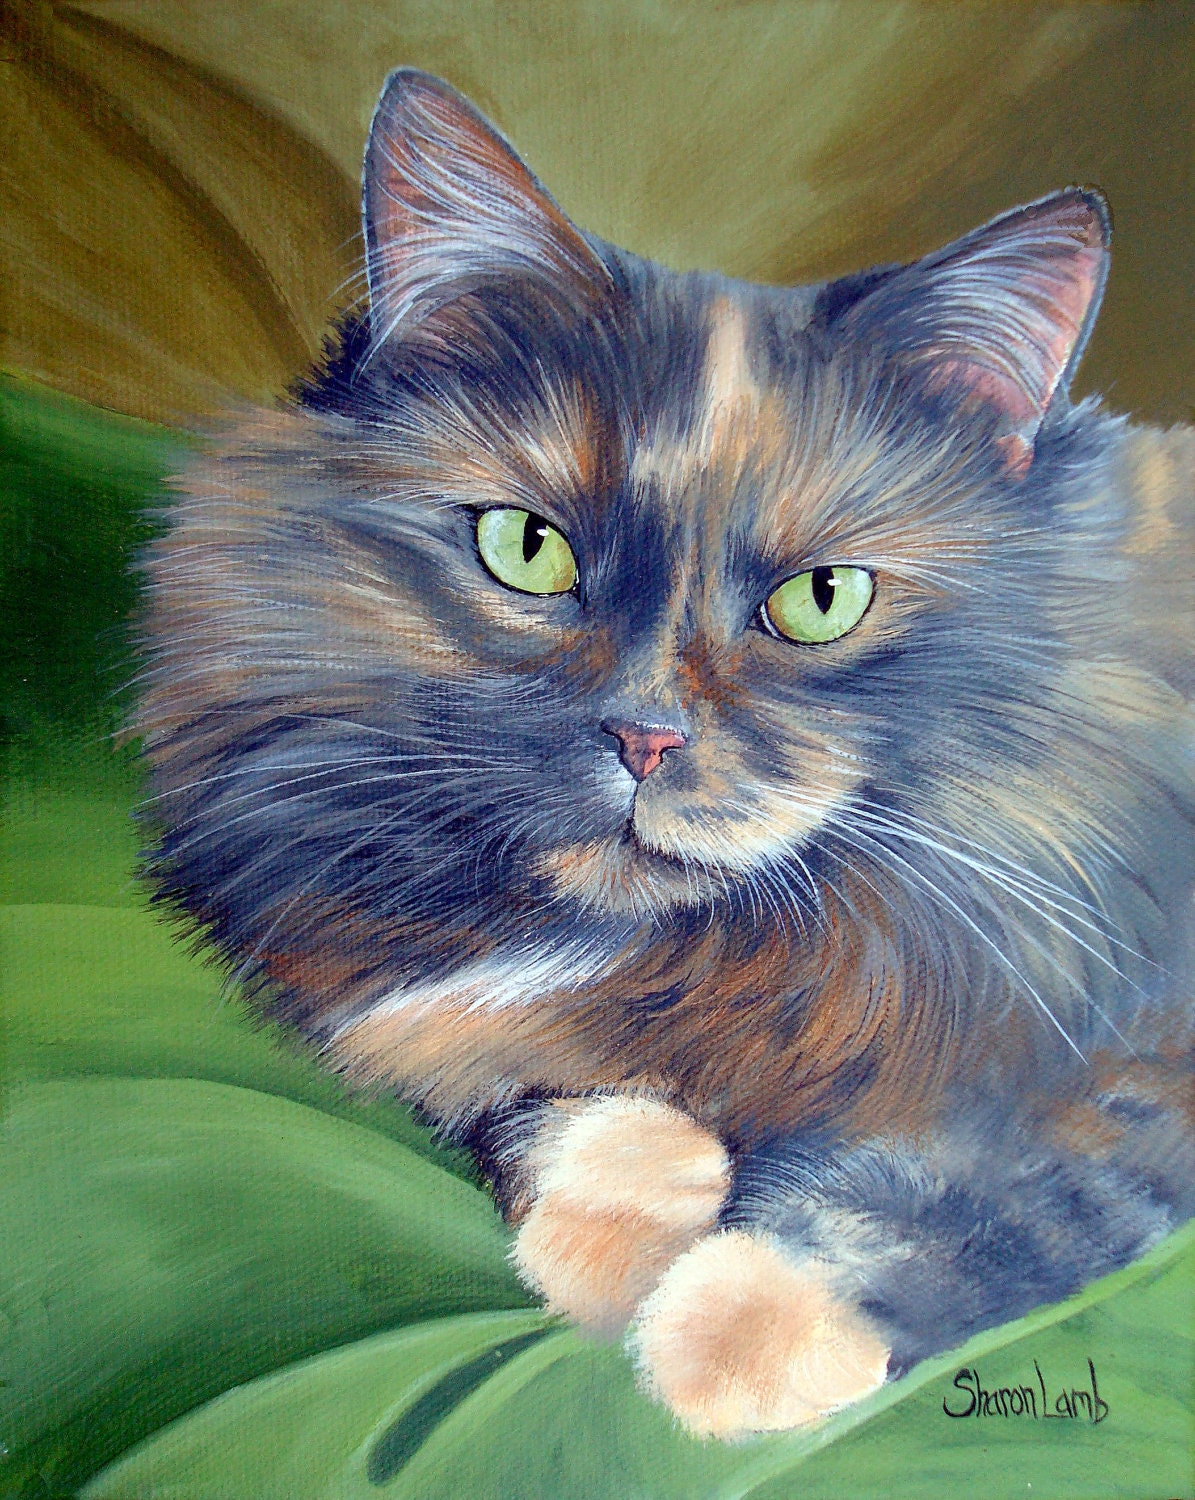 Hand Painted 8x10 Commissioned Pet Portrait Painting any Animal Artist Sharon Lamb